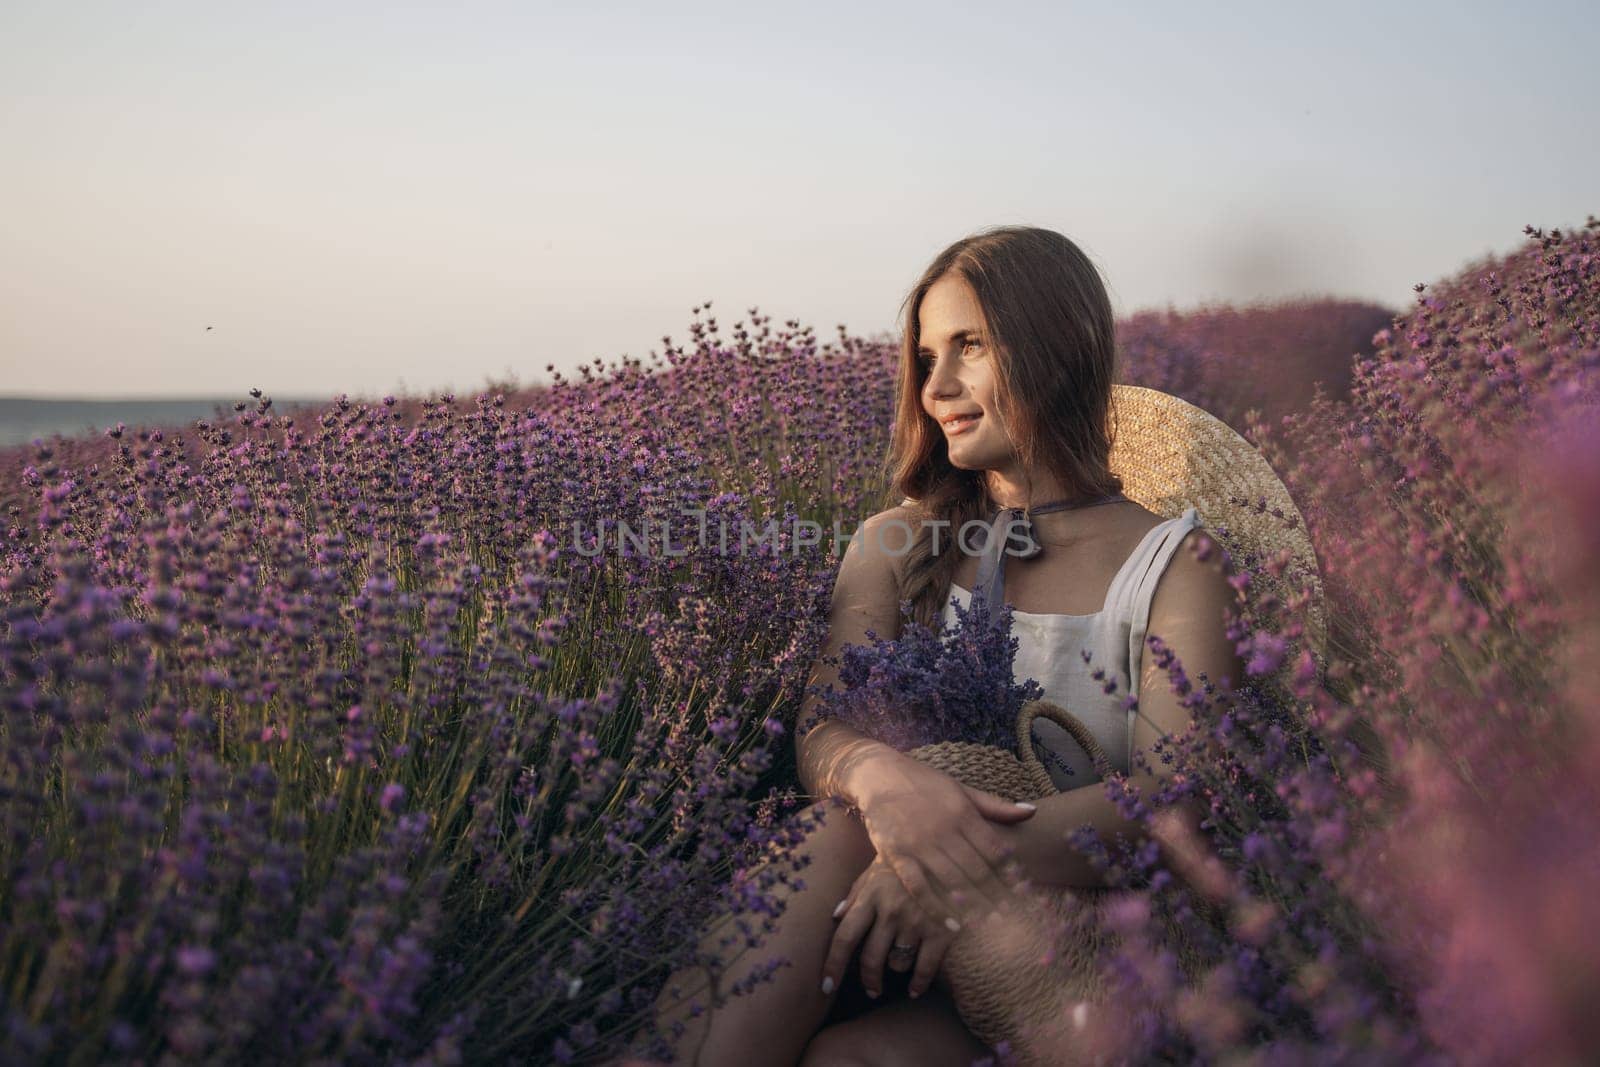 A woman is sitting in a field of lavender flowers. She is wearing a straw hat and holding a basket of flowers. The scene is peaceful and serene, with the woman enjoying the beauty of the flowers. by Matiunina